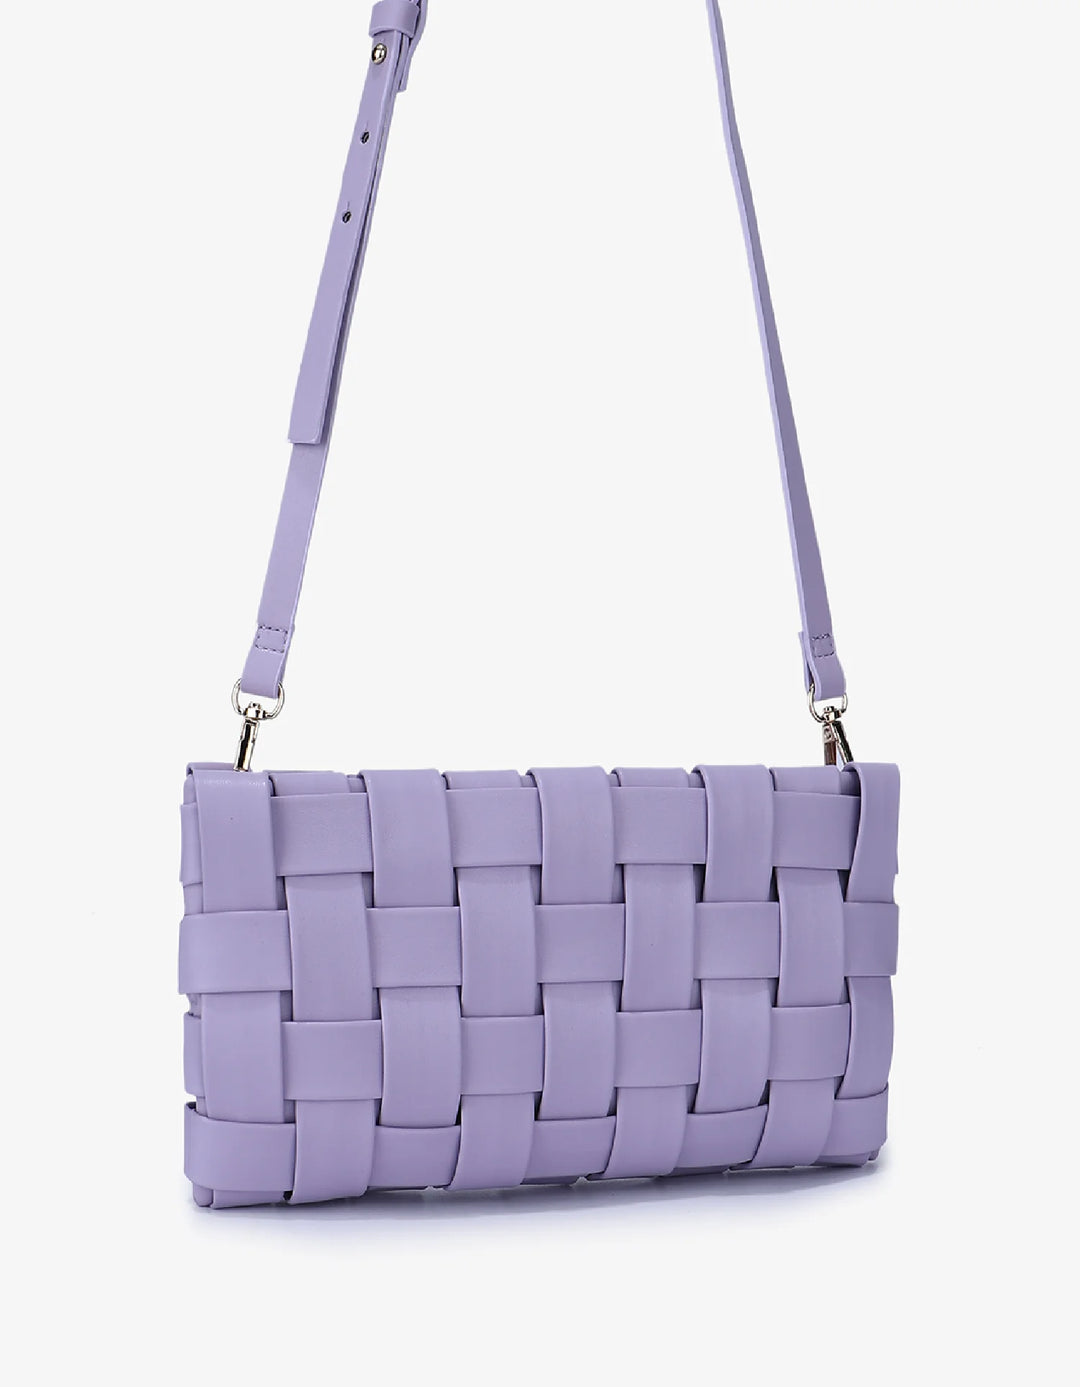 Remi/Reid Lindy Small Woven Clutch - Lavender